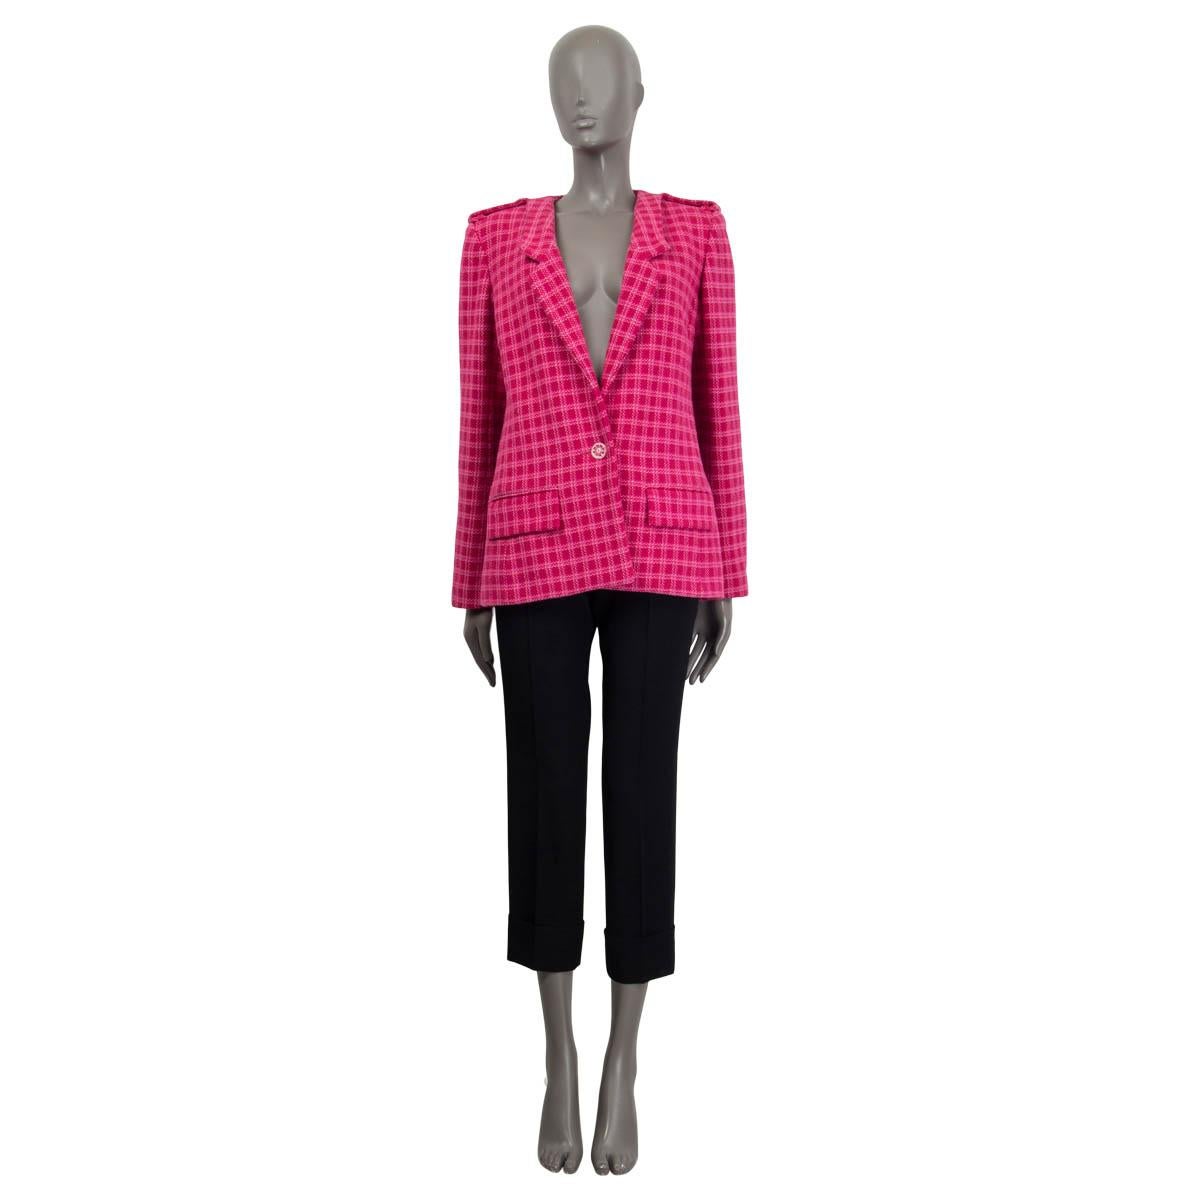 100% authentic Chanel Cruise 2016 Seoul oversized one-button tweed blazer in pink cotton (92%) and acrylic (8%). Features epaulettes at the shoulders and buttoned cuffs. Has two sewn shut flap pockets on the front. Opens with one button at th front.